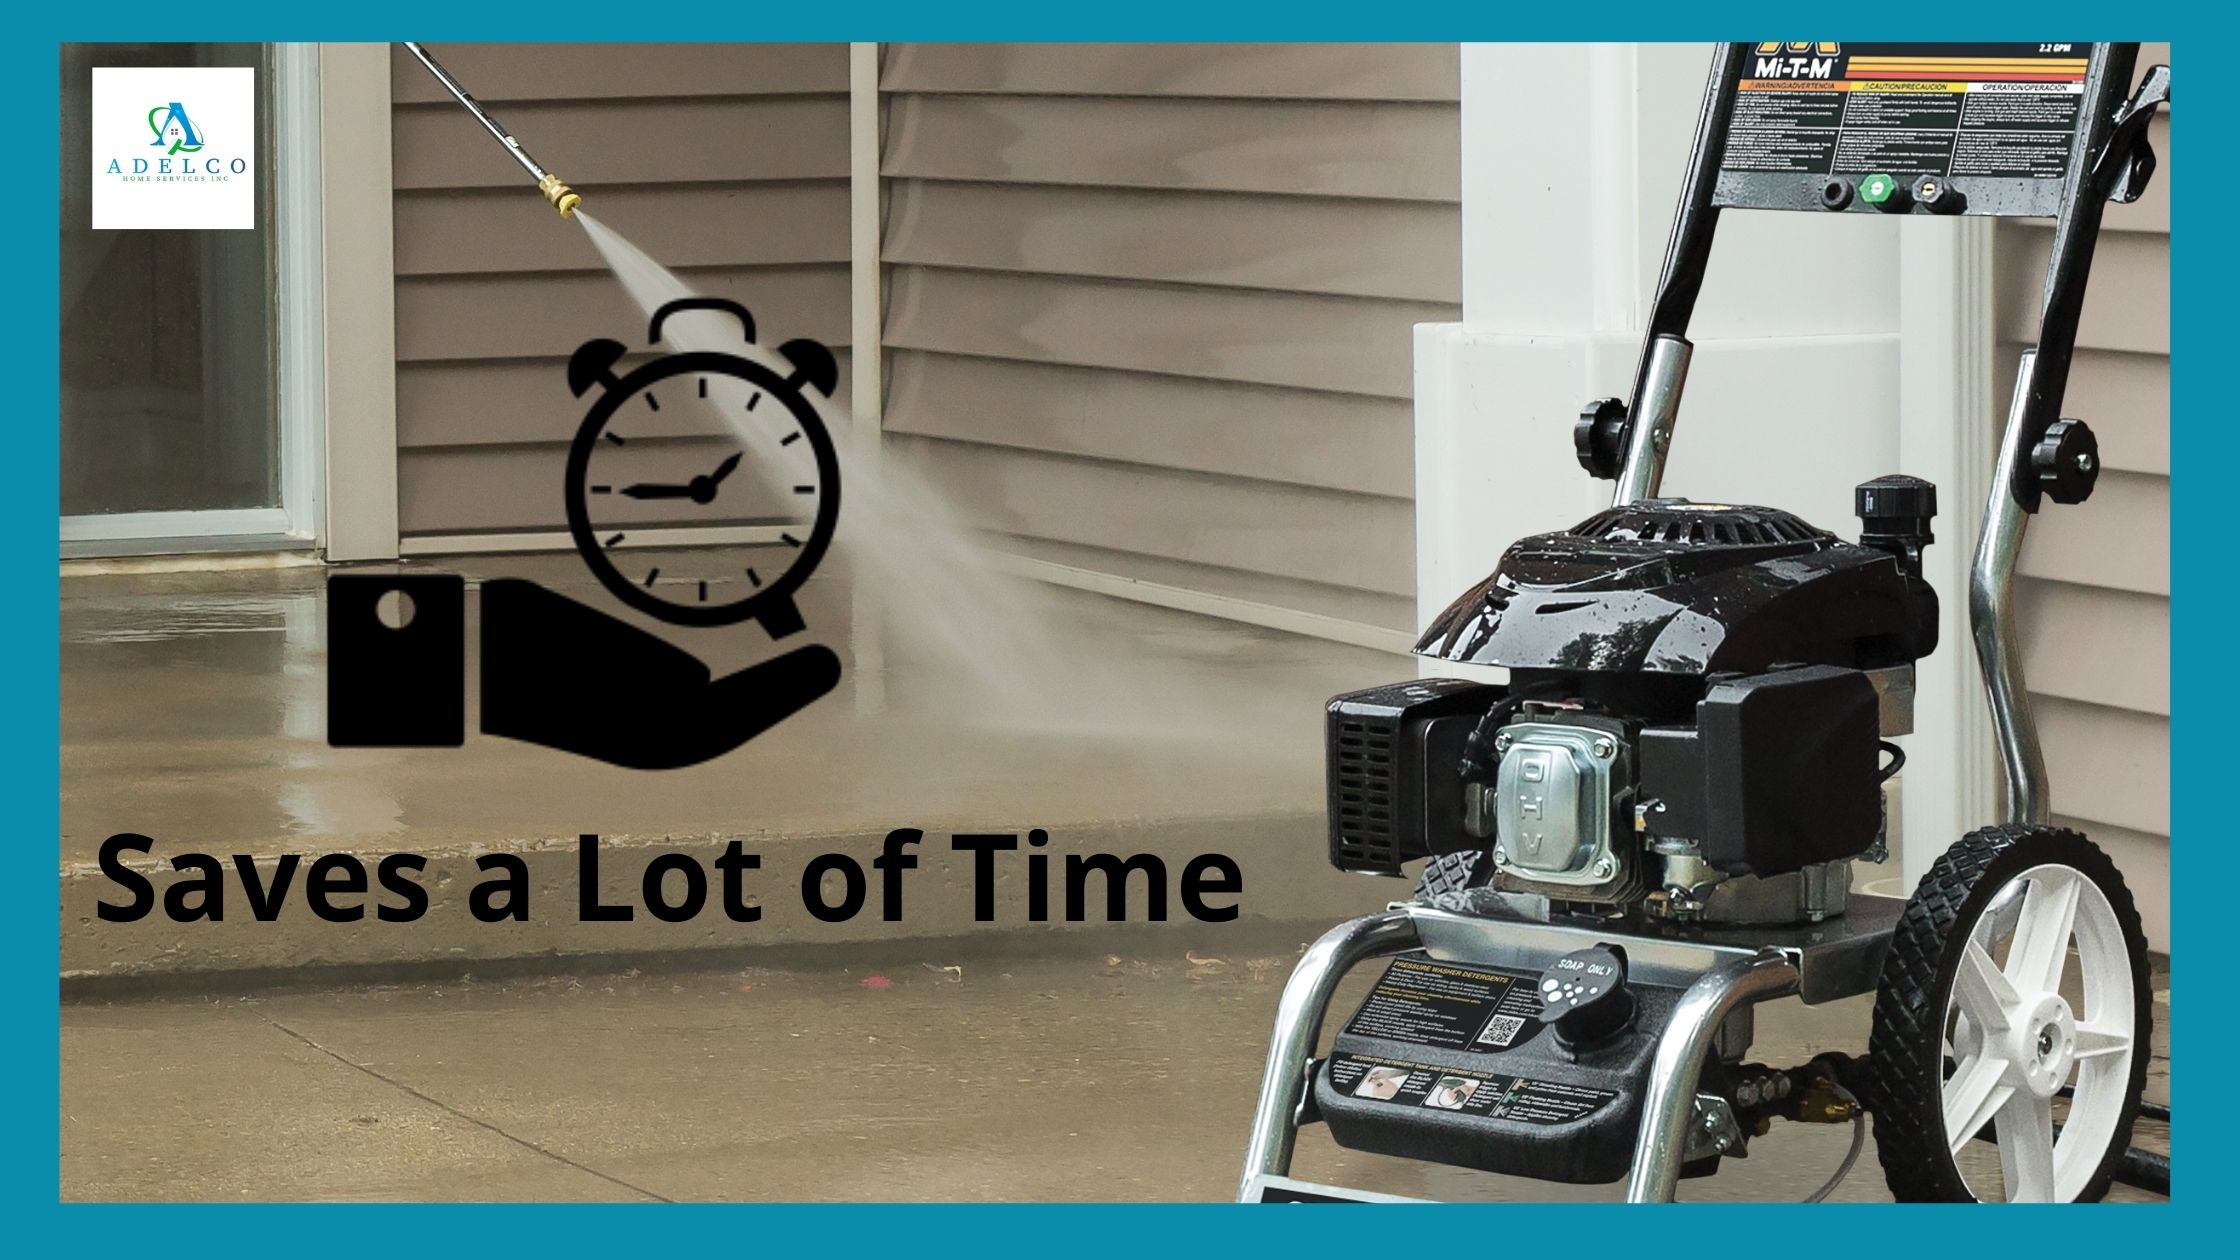 Electric Power Washer Saves a Lot of Time